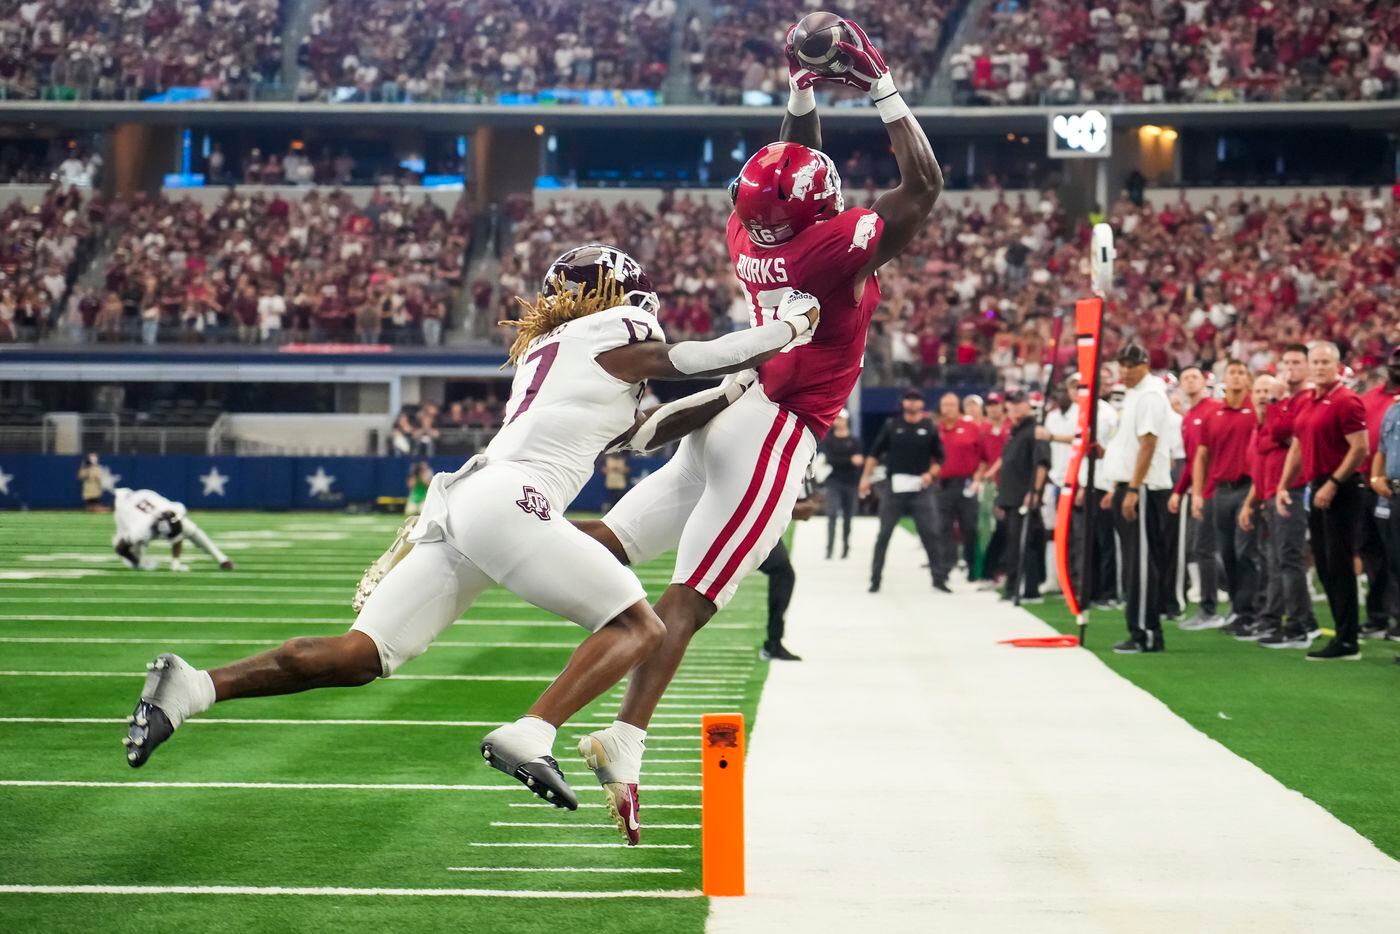 Arkansas wide receiver Treylon Burks (16) can’t come down in bounds on a pass near the goal...